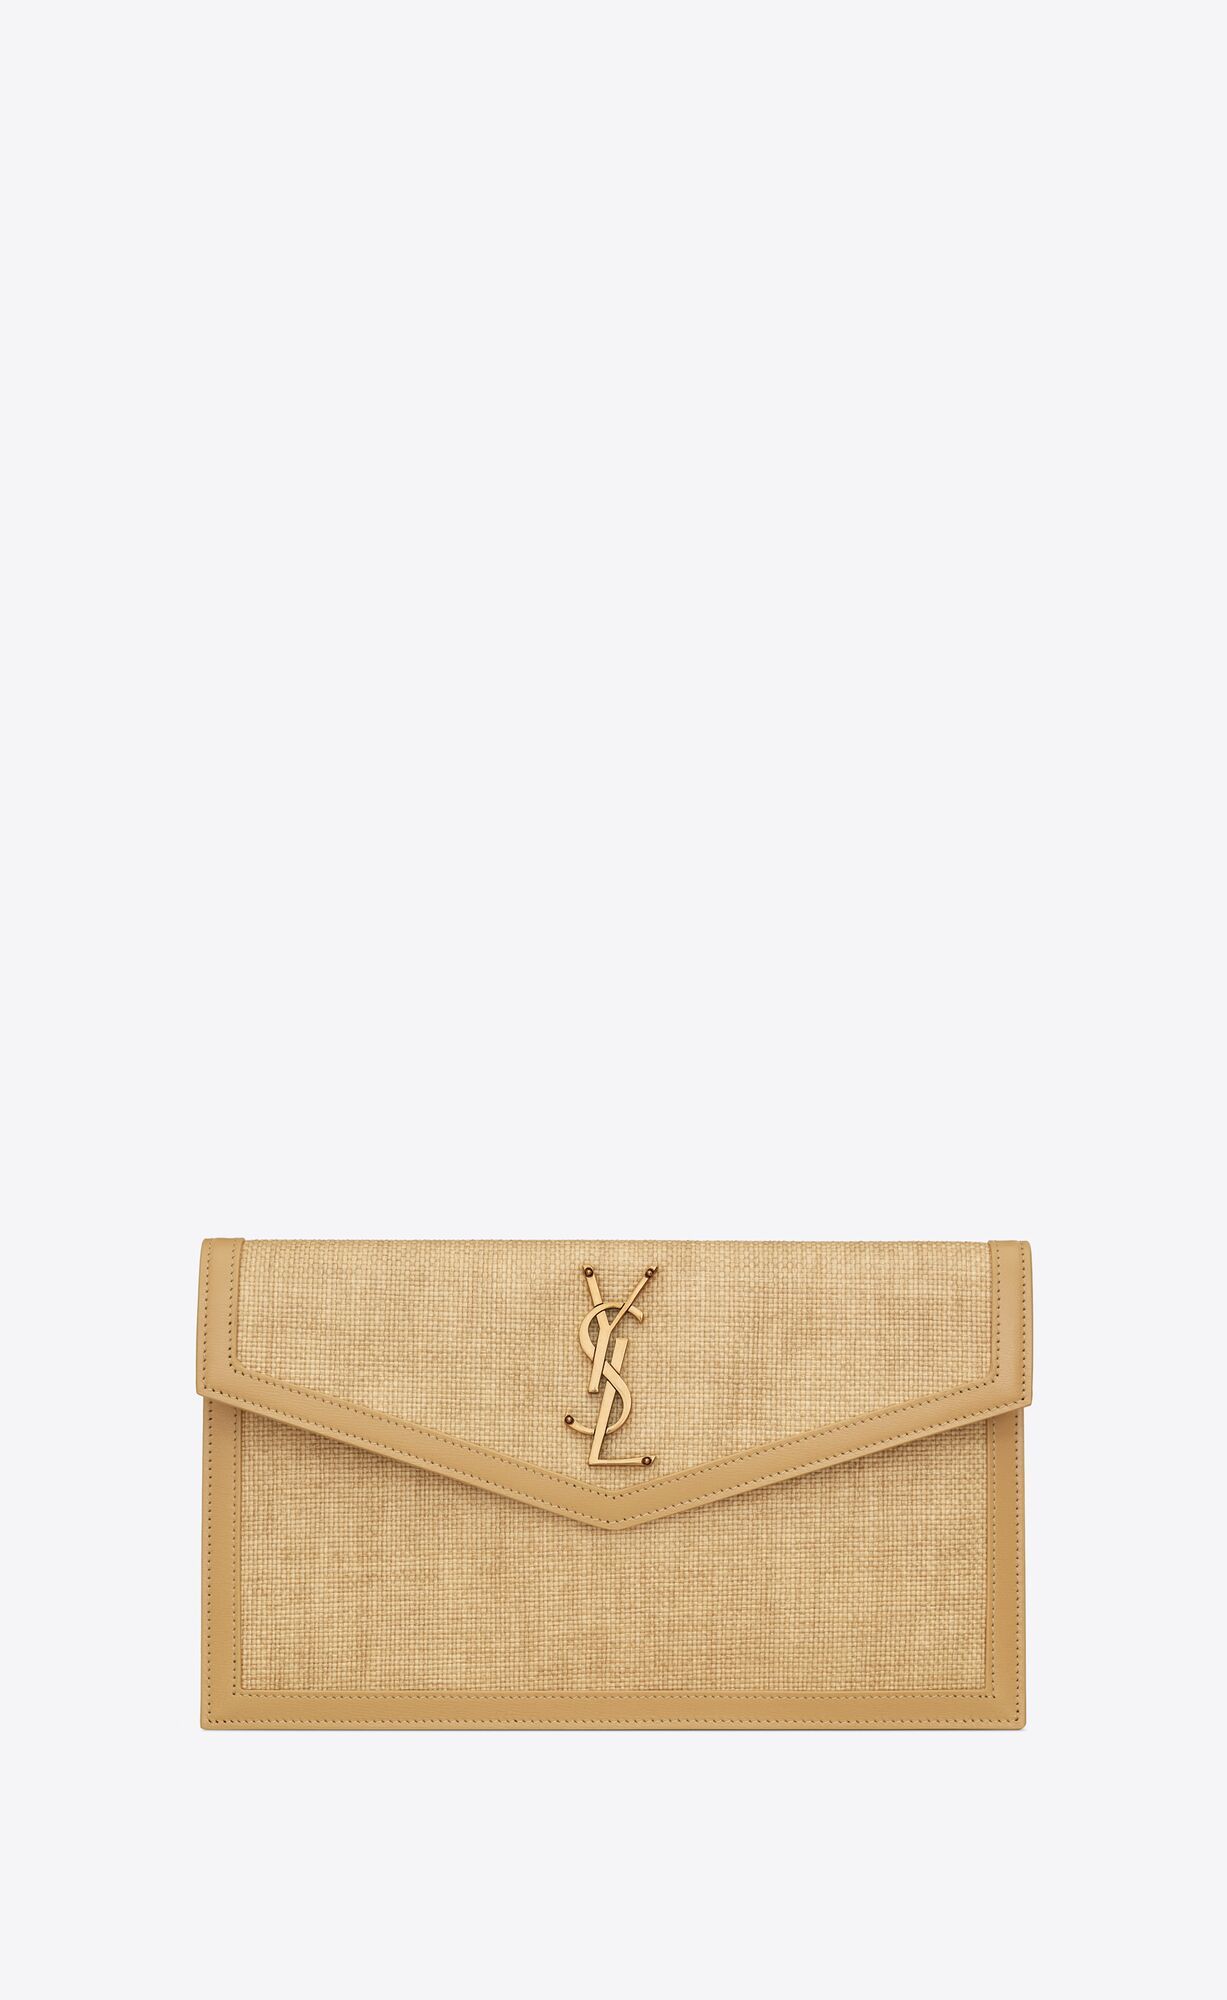 Small envelope pouch with a flap decorated WITH THE CASSANDRE. | Saint Laurent Inc. (Global)